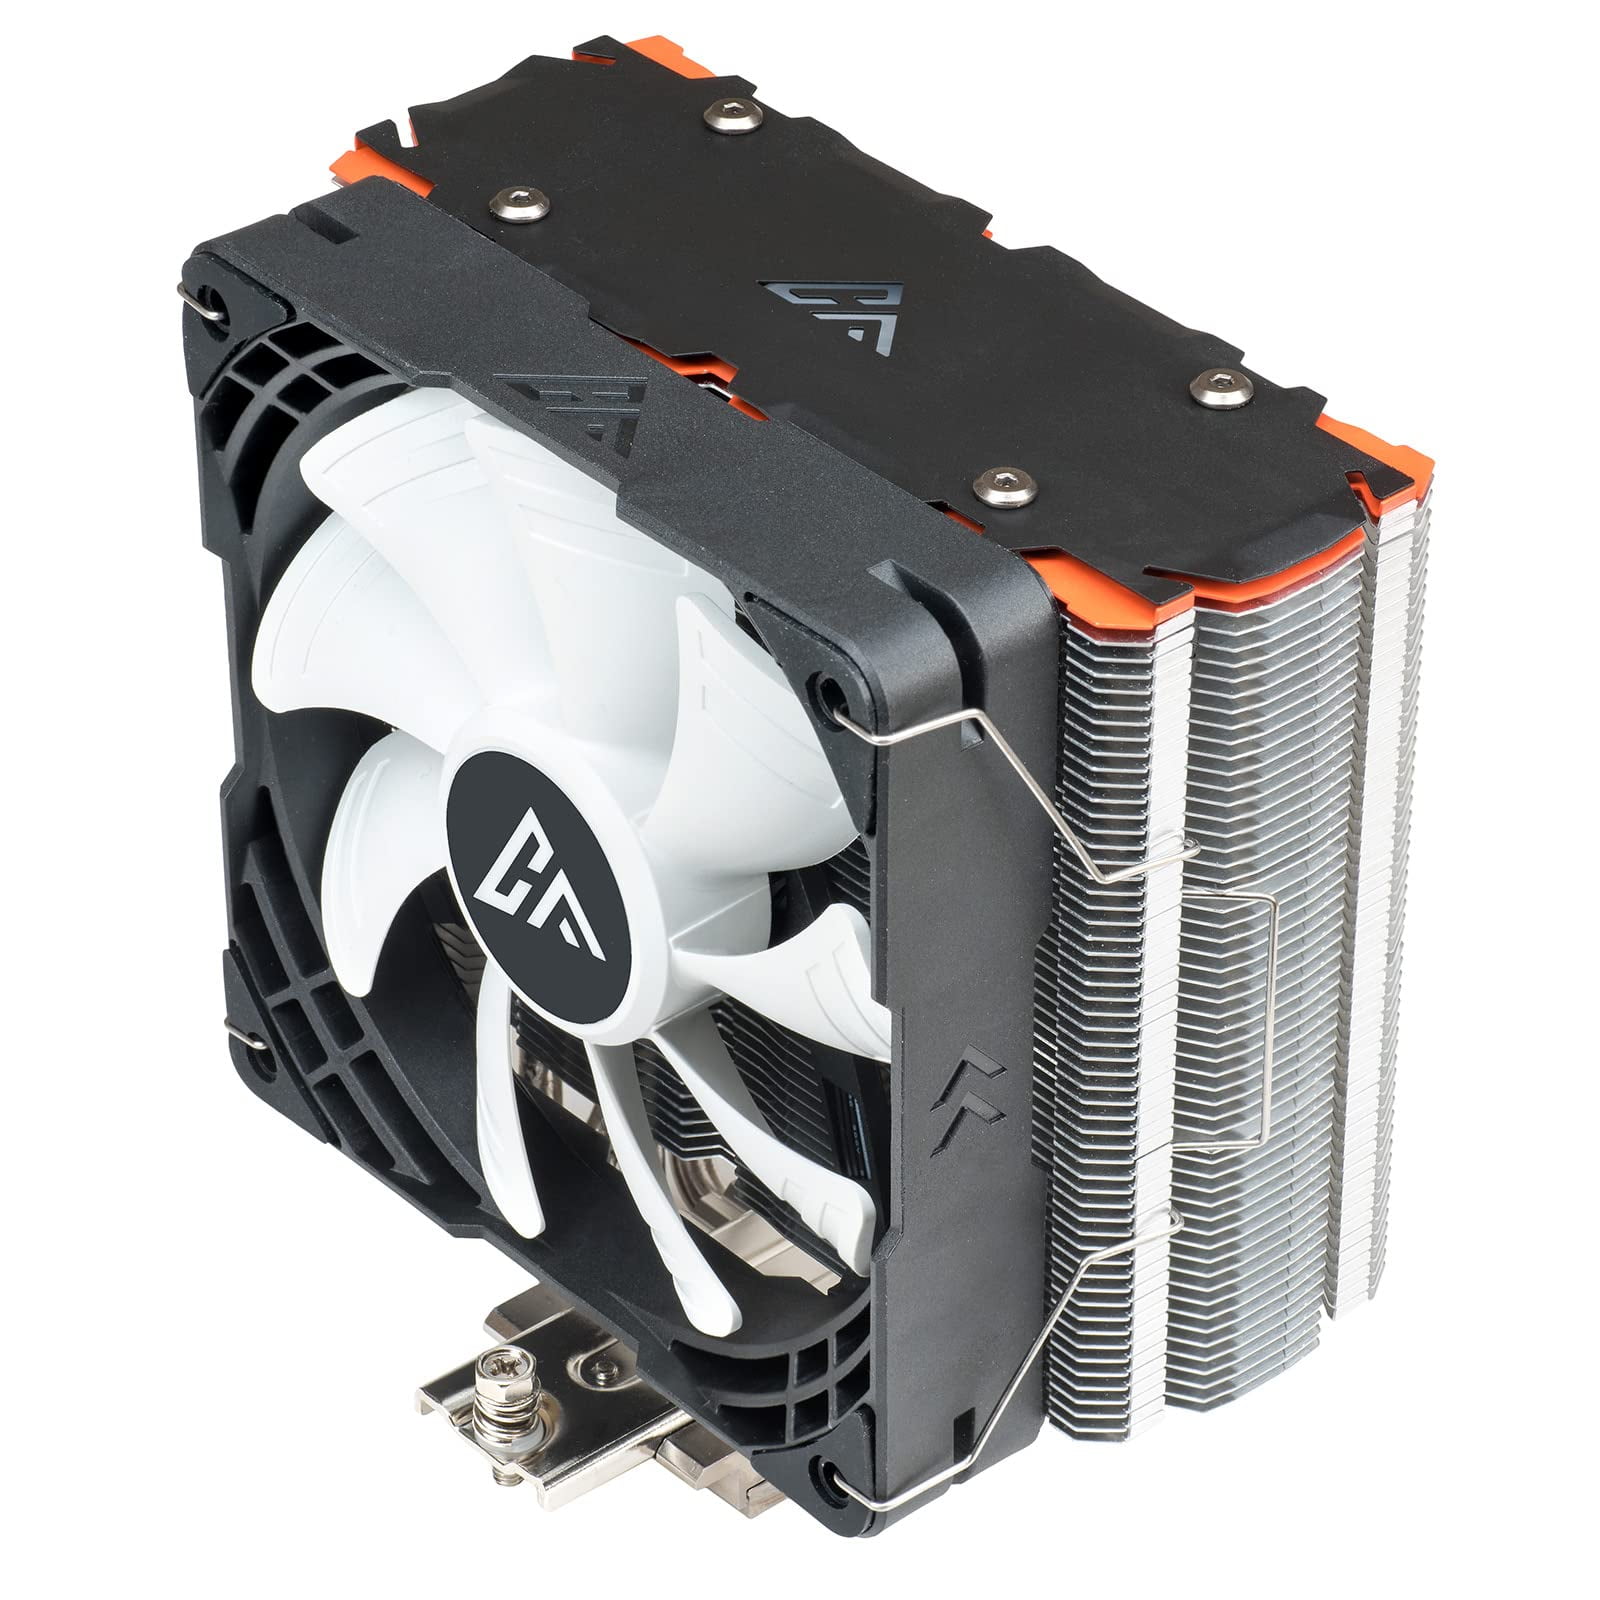 EVAPORATIVE AIR COOLERS VS TOWER FANS: WHICH IS MORE EFFECTIVE? - Ram  Coolers